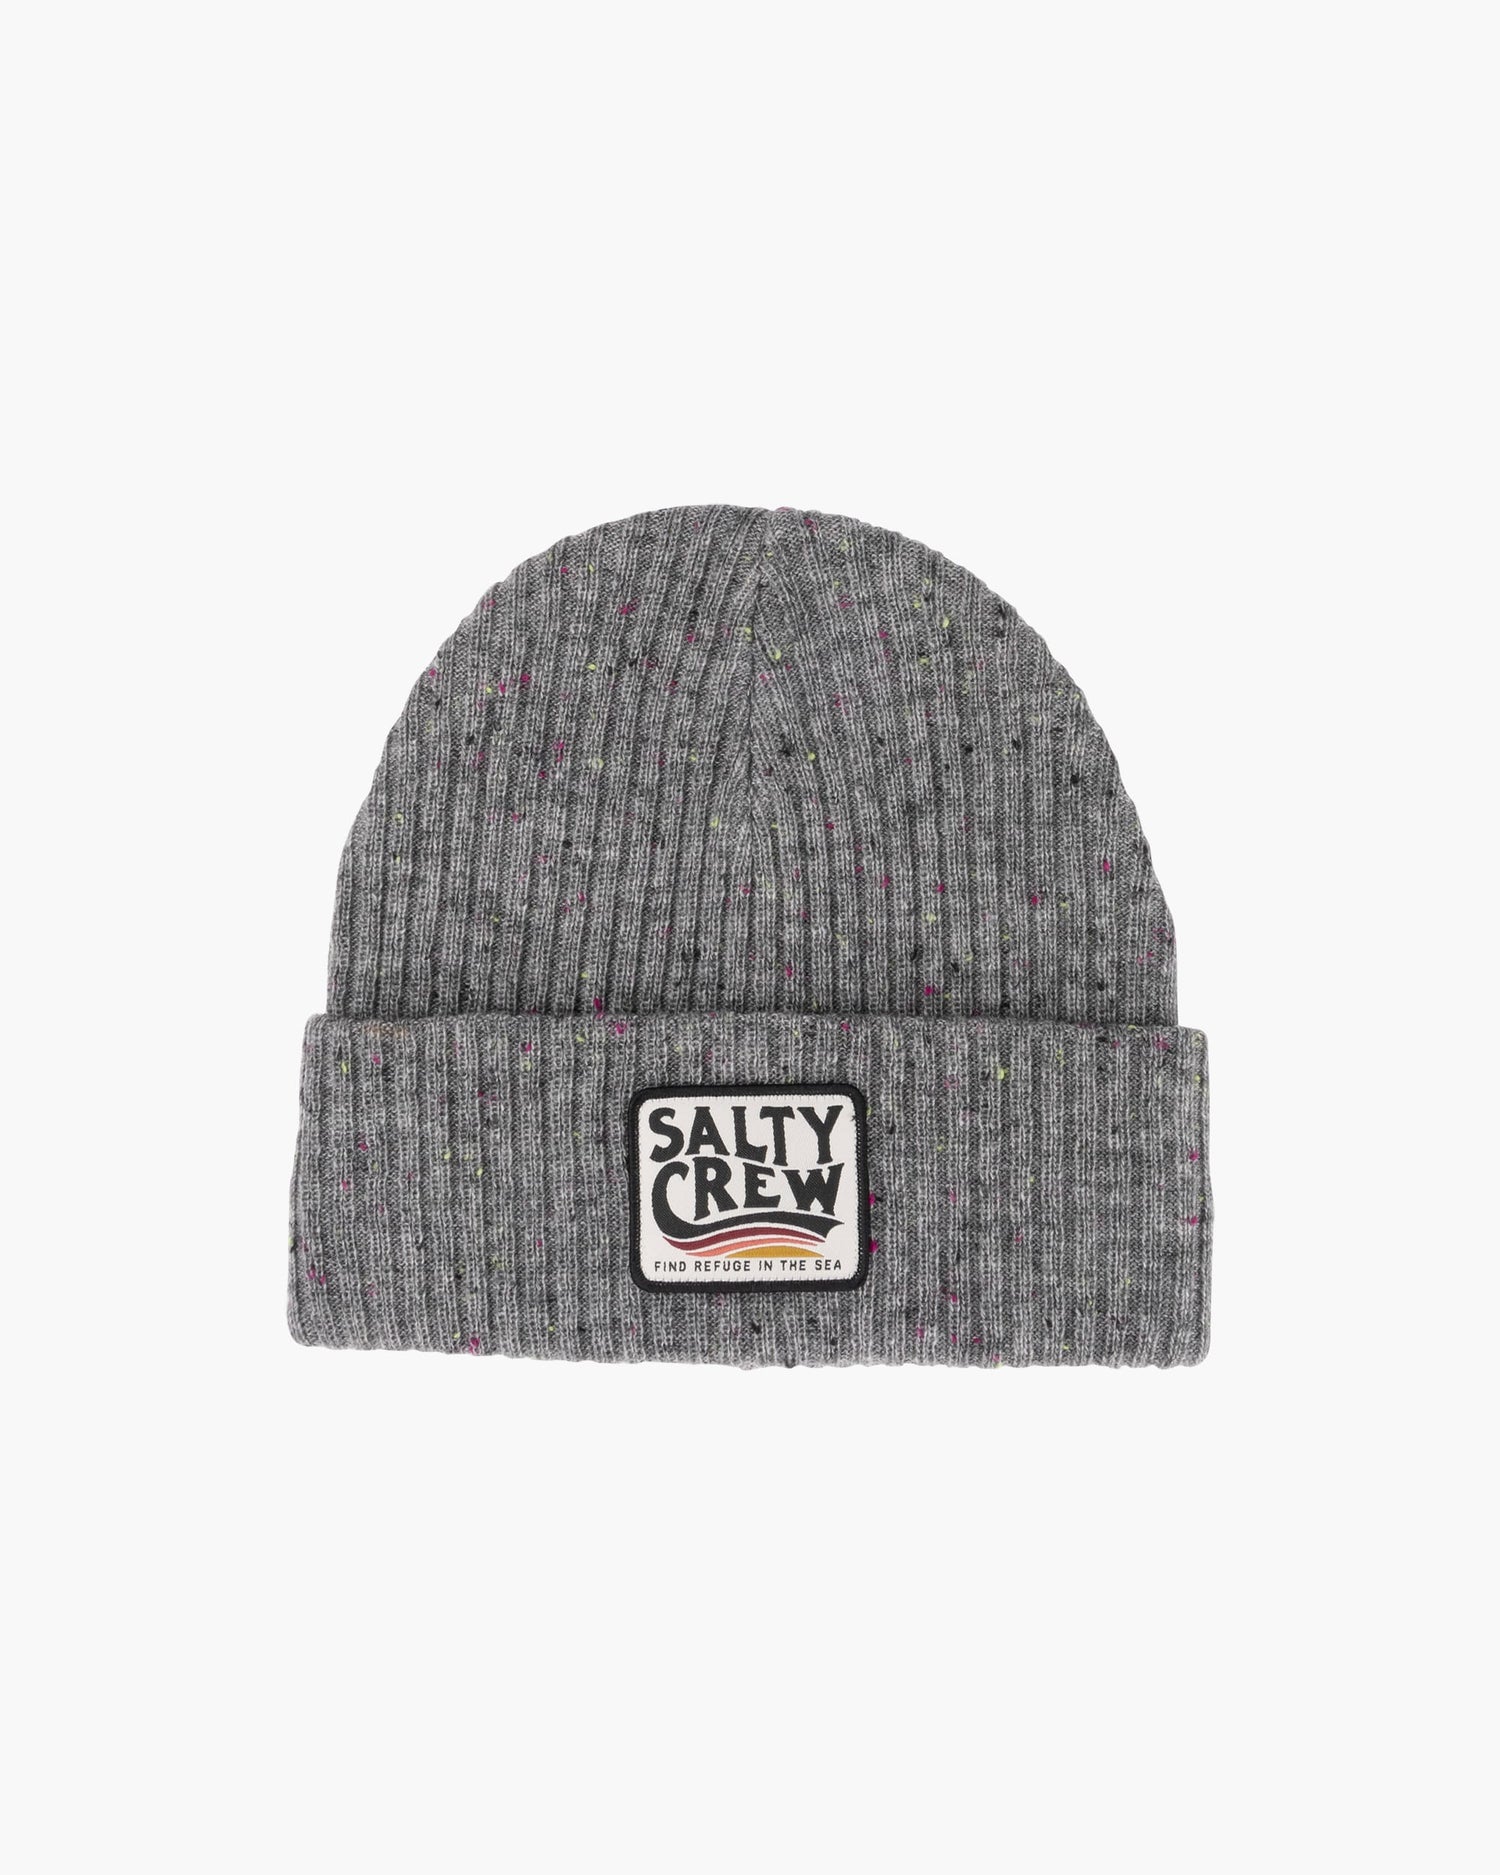 Salty crew BEANIES THE WAVE BEANIE - Athletic Heather in Athletic Heather